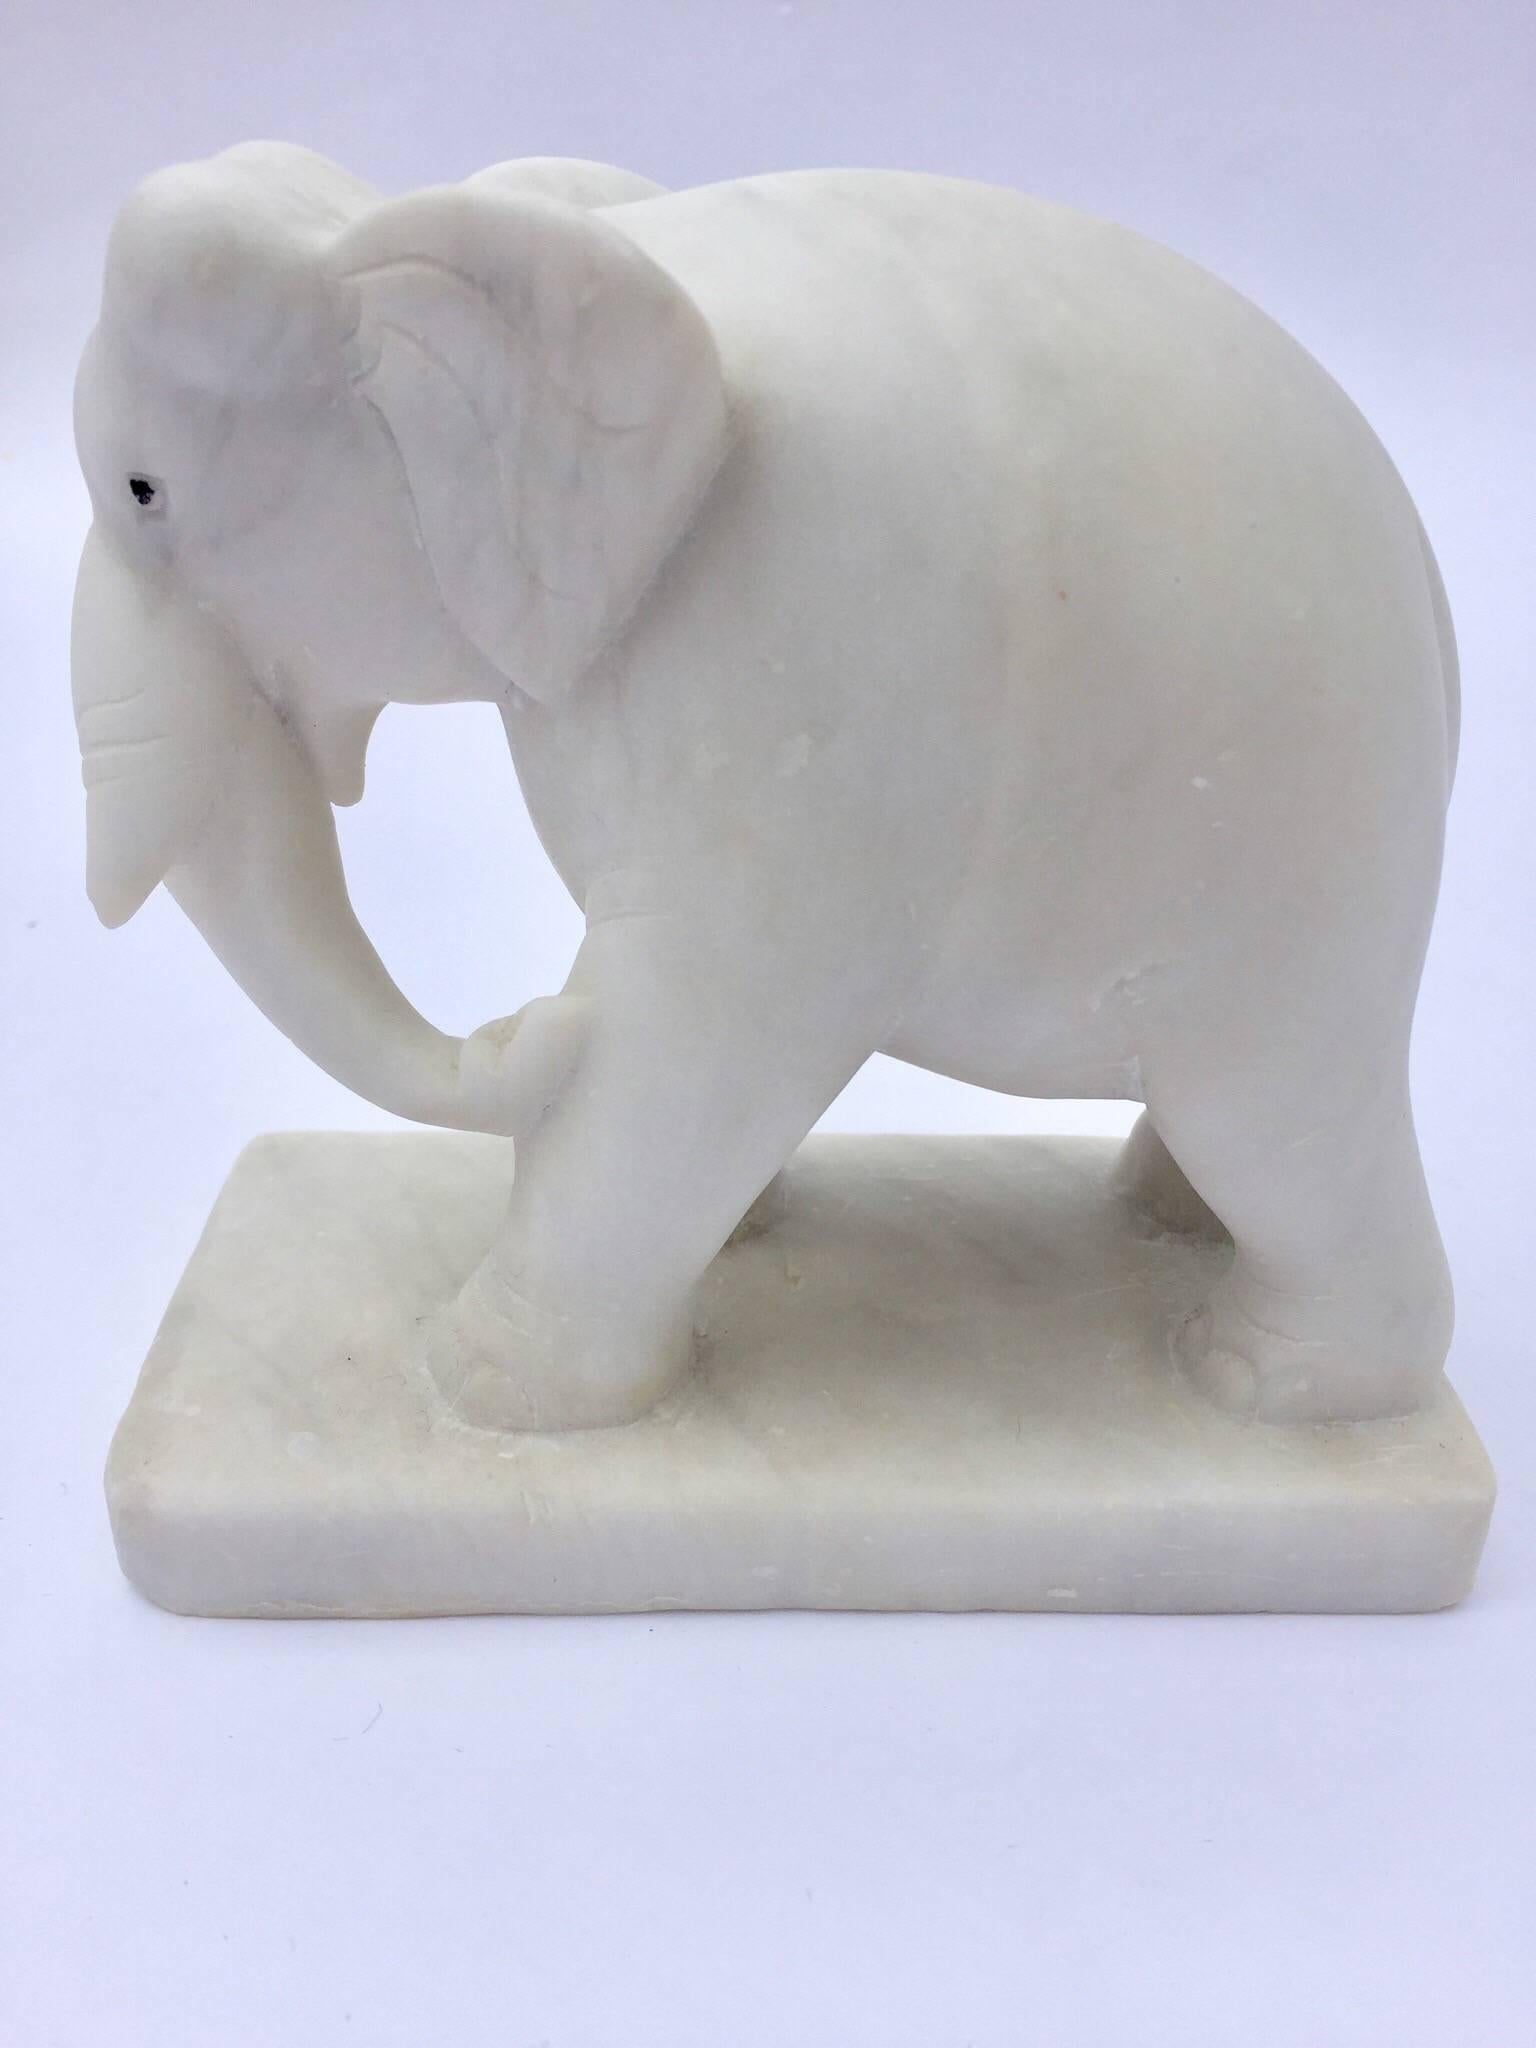 Elegant sculpture that show an elephant carved in white marble presented on a stand.
The representation of elephant in Asia represent wisdom, longevity and white marble is for peace.
Hand-carved white marble elephant on stand from Jaipur,